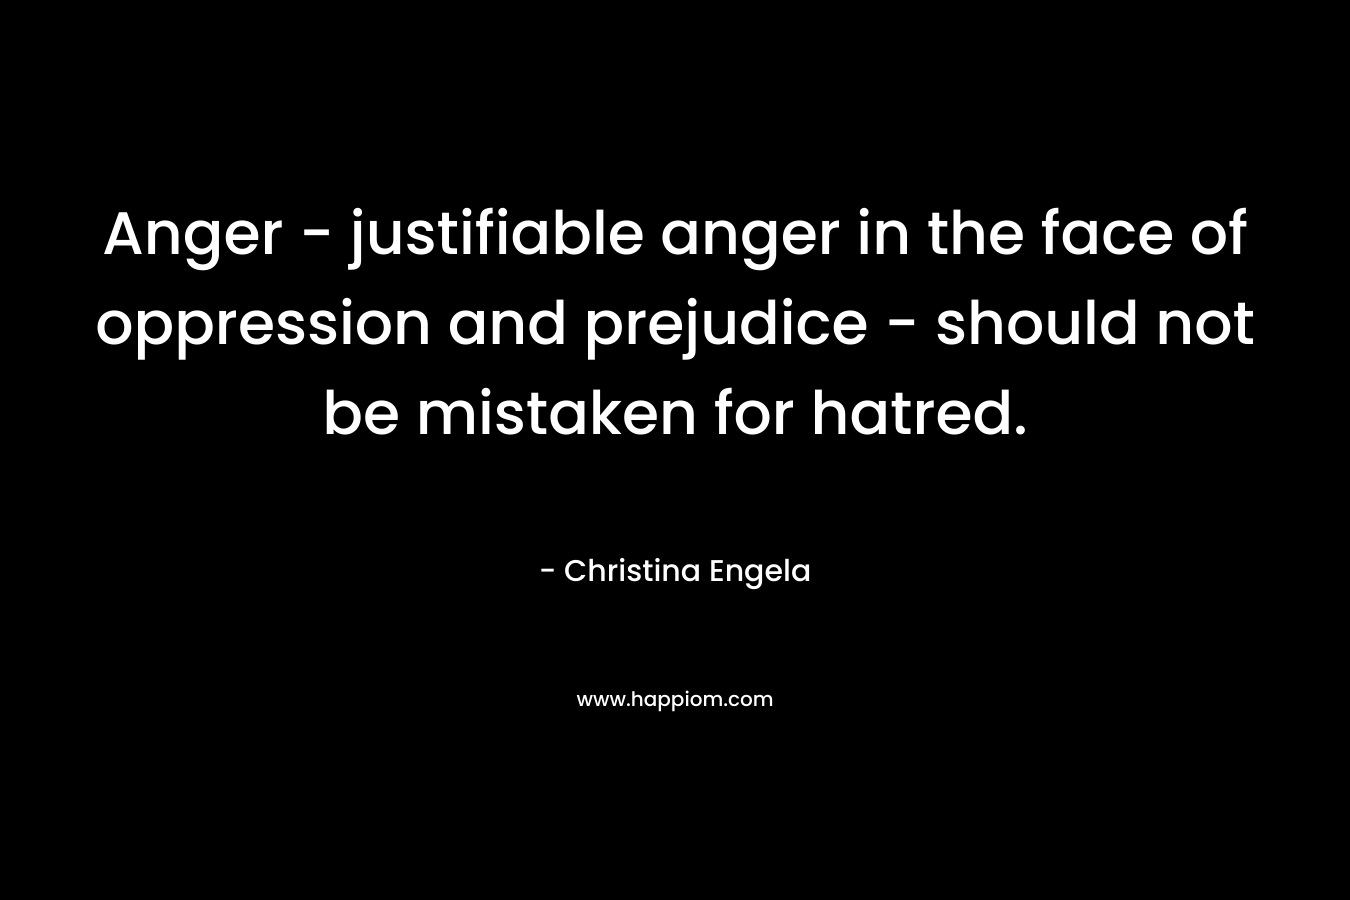 Anger – justifiable anger in the face of oppression and prejudice – should not be mistaken for hatred. – Christina Engela